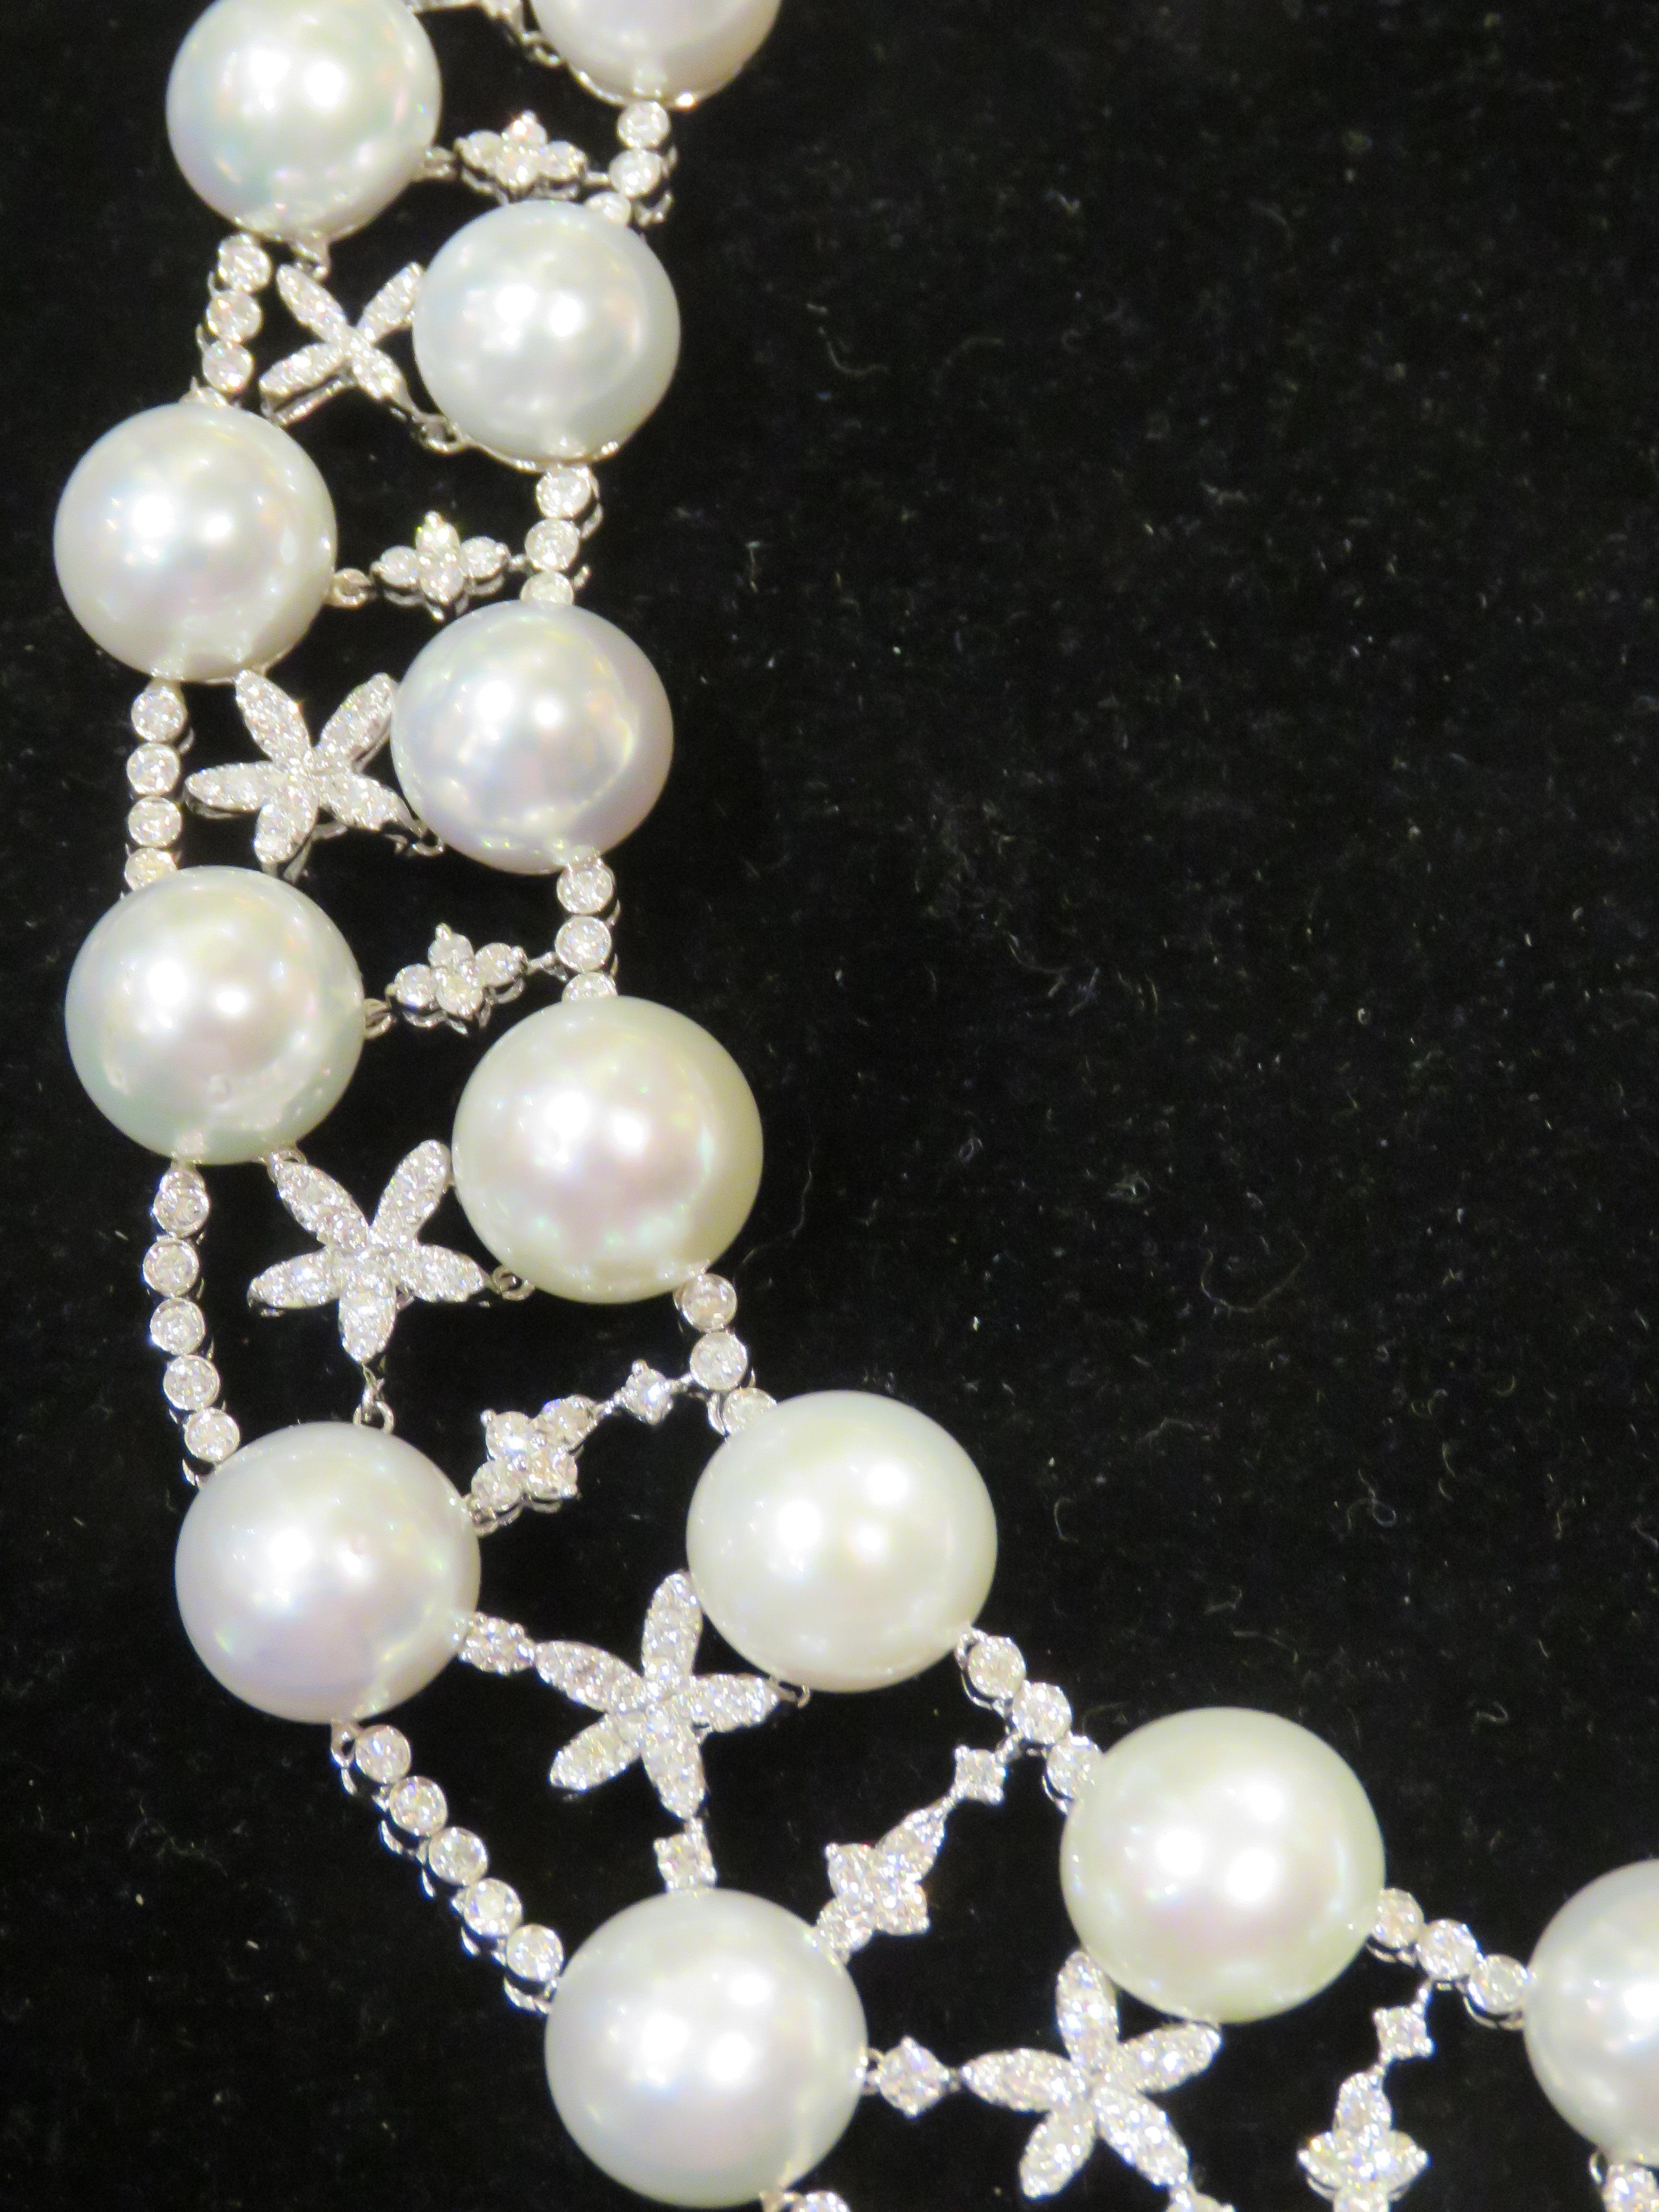 The Following Item we are Offering is this Magnificent 18KT Gold Large Extremely Rare South Sea Pearl and Fancy Diamond Necklace. This Spectacular Necklace contains 42 Large 11-12.6MM  AA-AAA Rare High Luster Whitel South Sea Pearls and approx